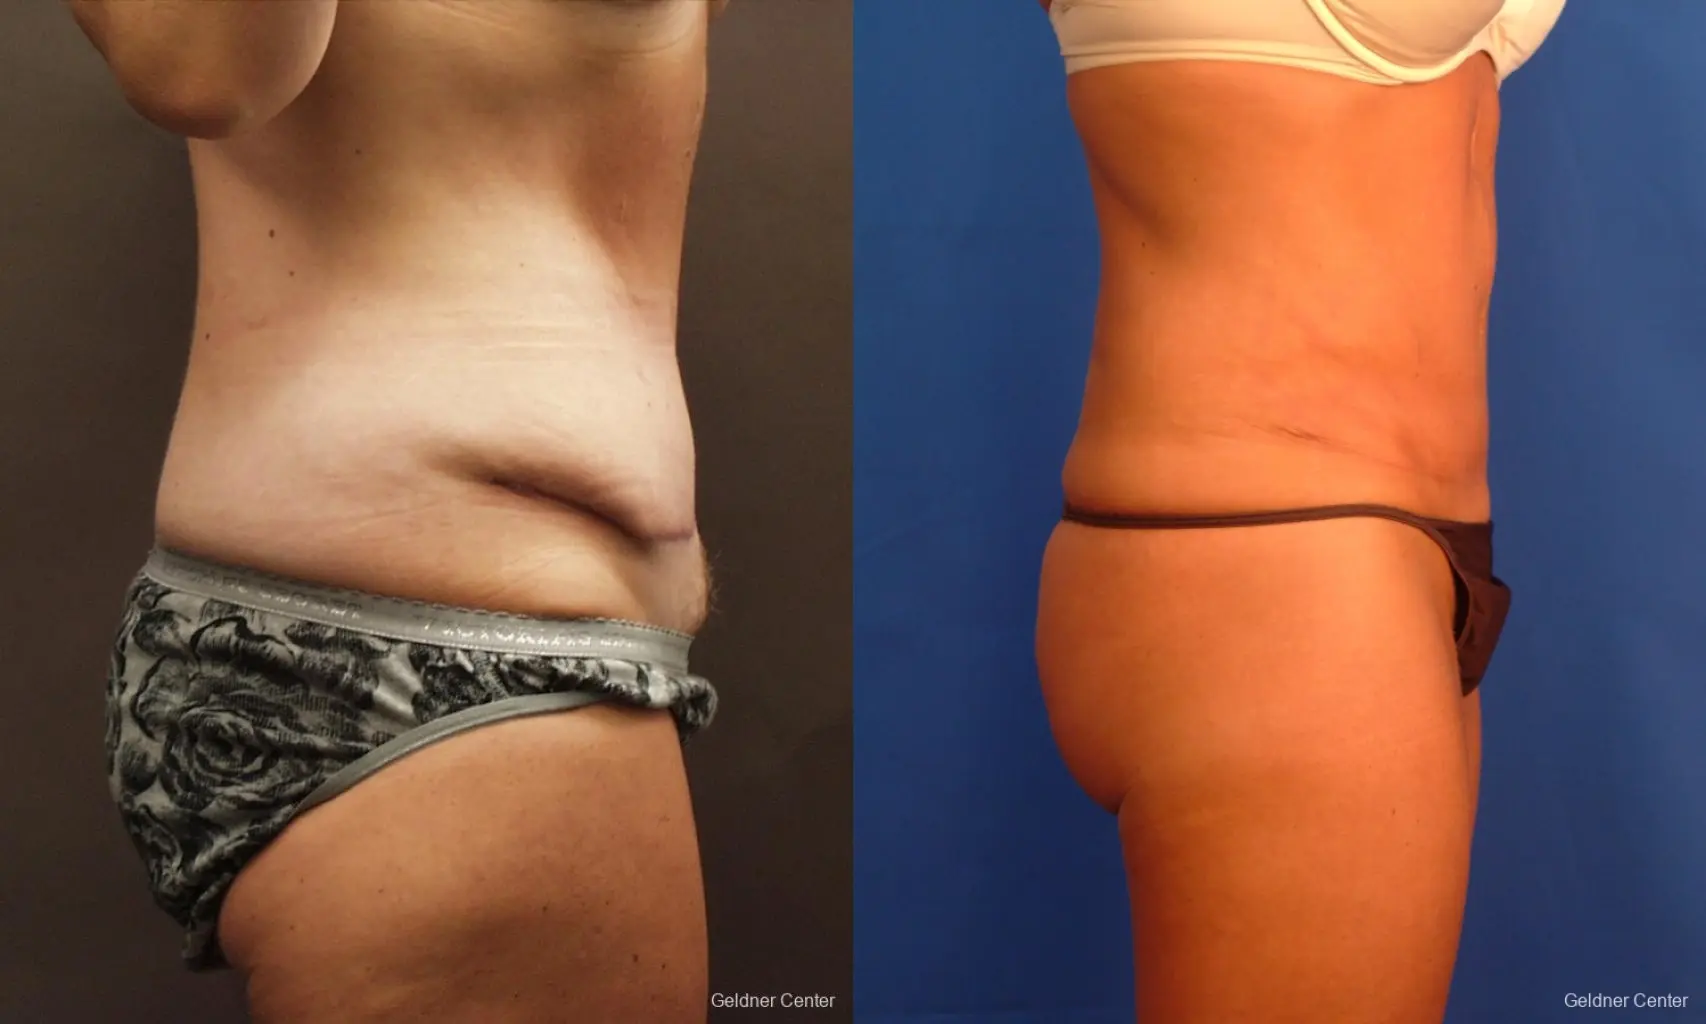 Liposuction: Patient 16 - Before and After 2